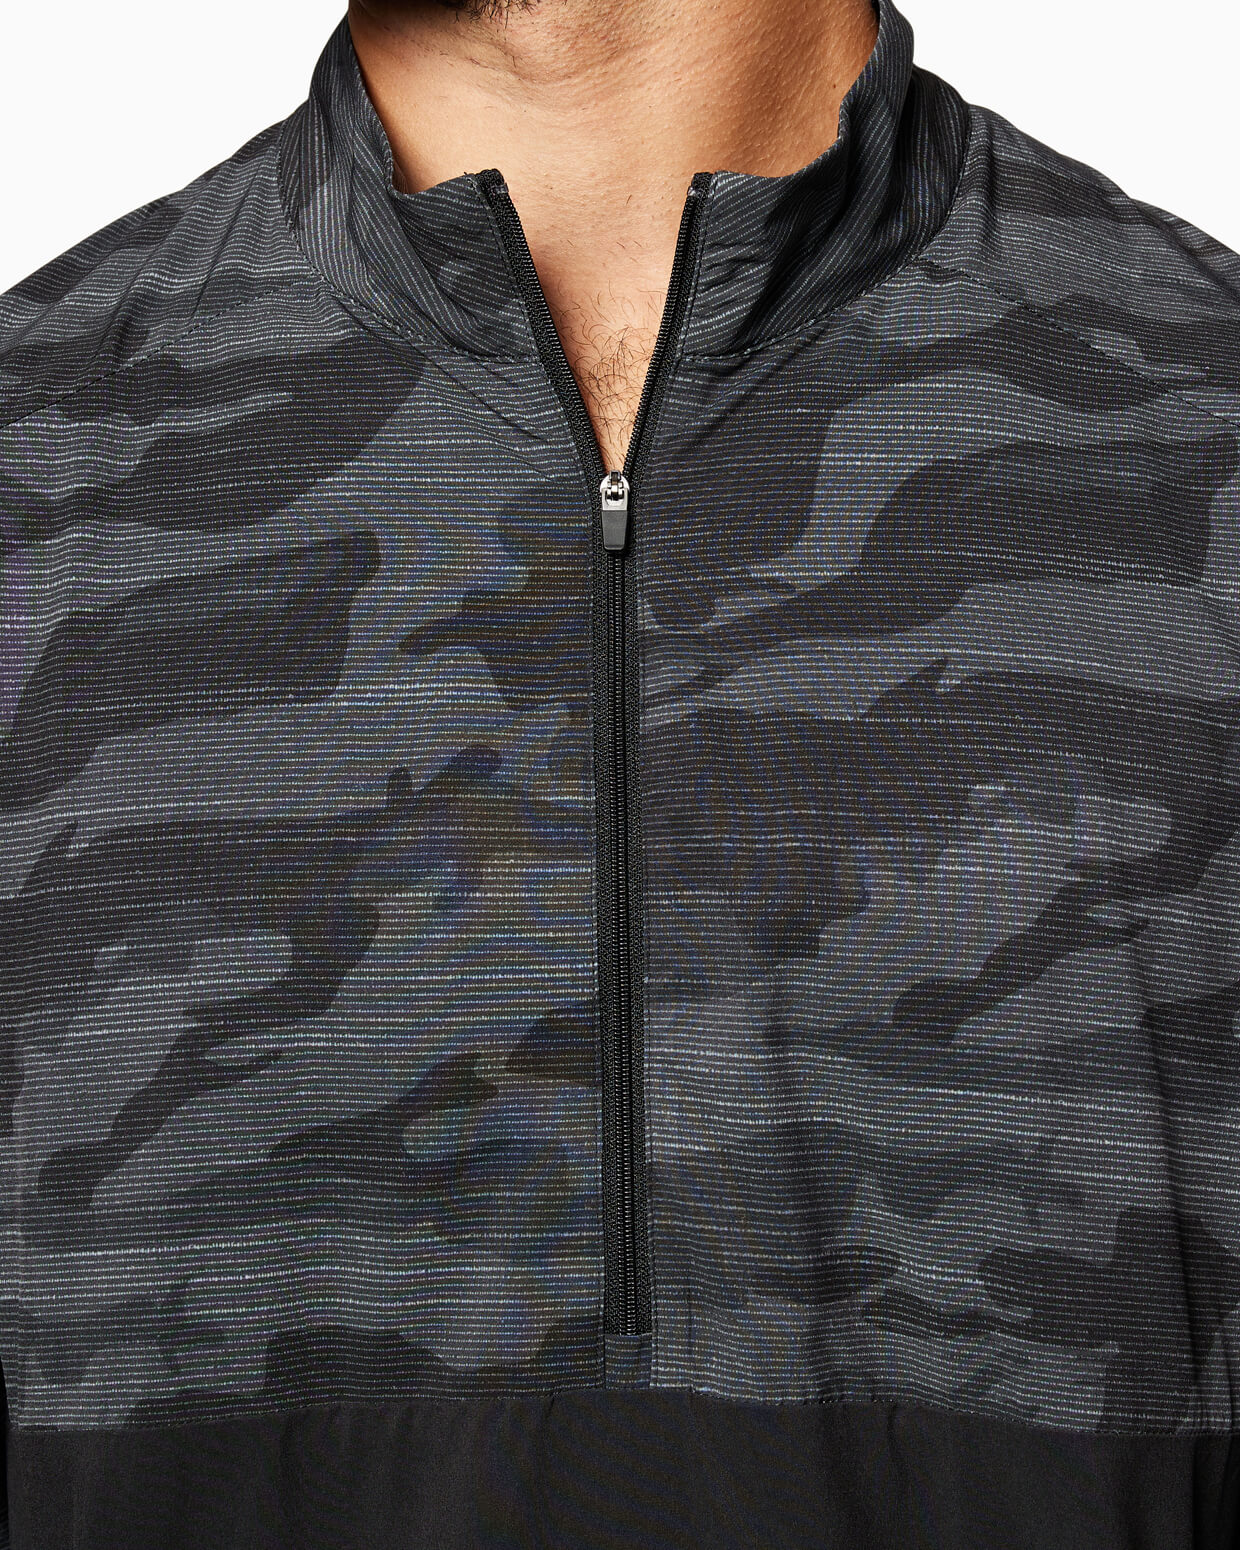 Offshore | Performance Jacket